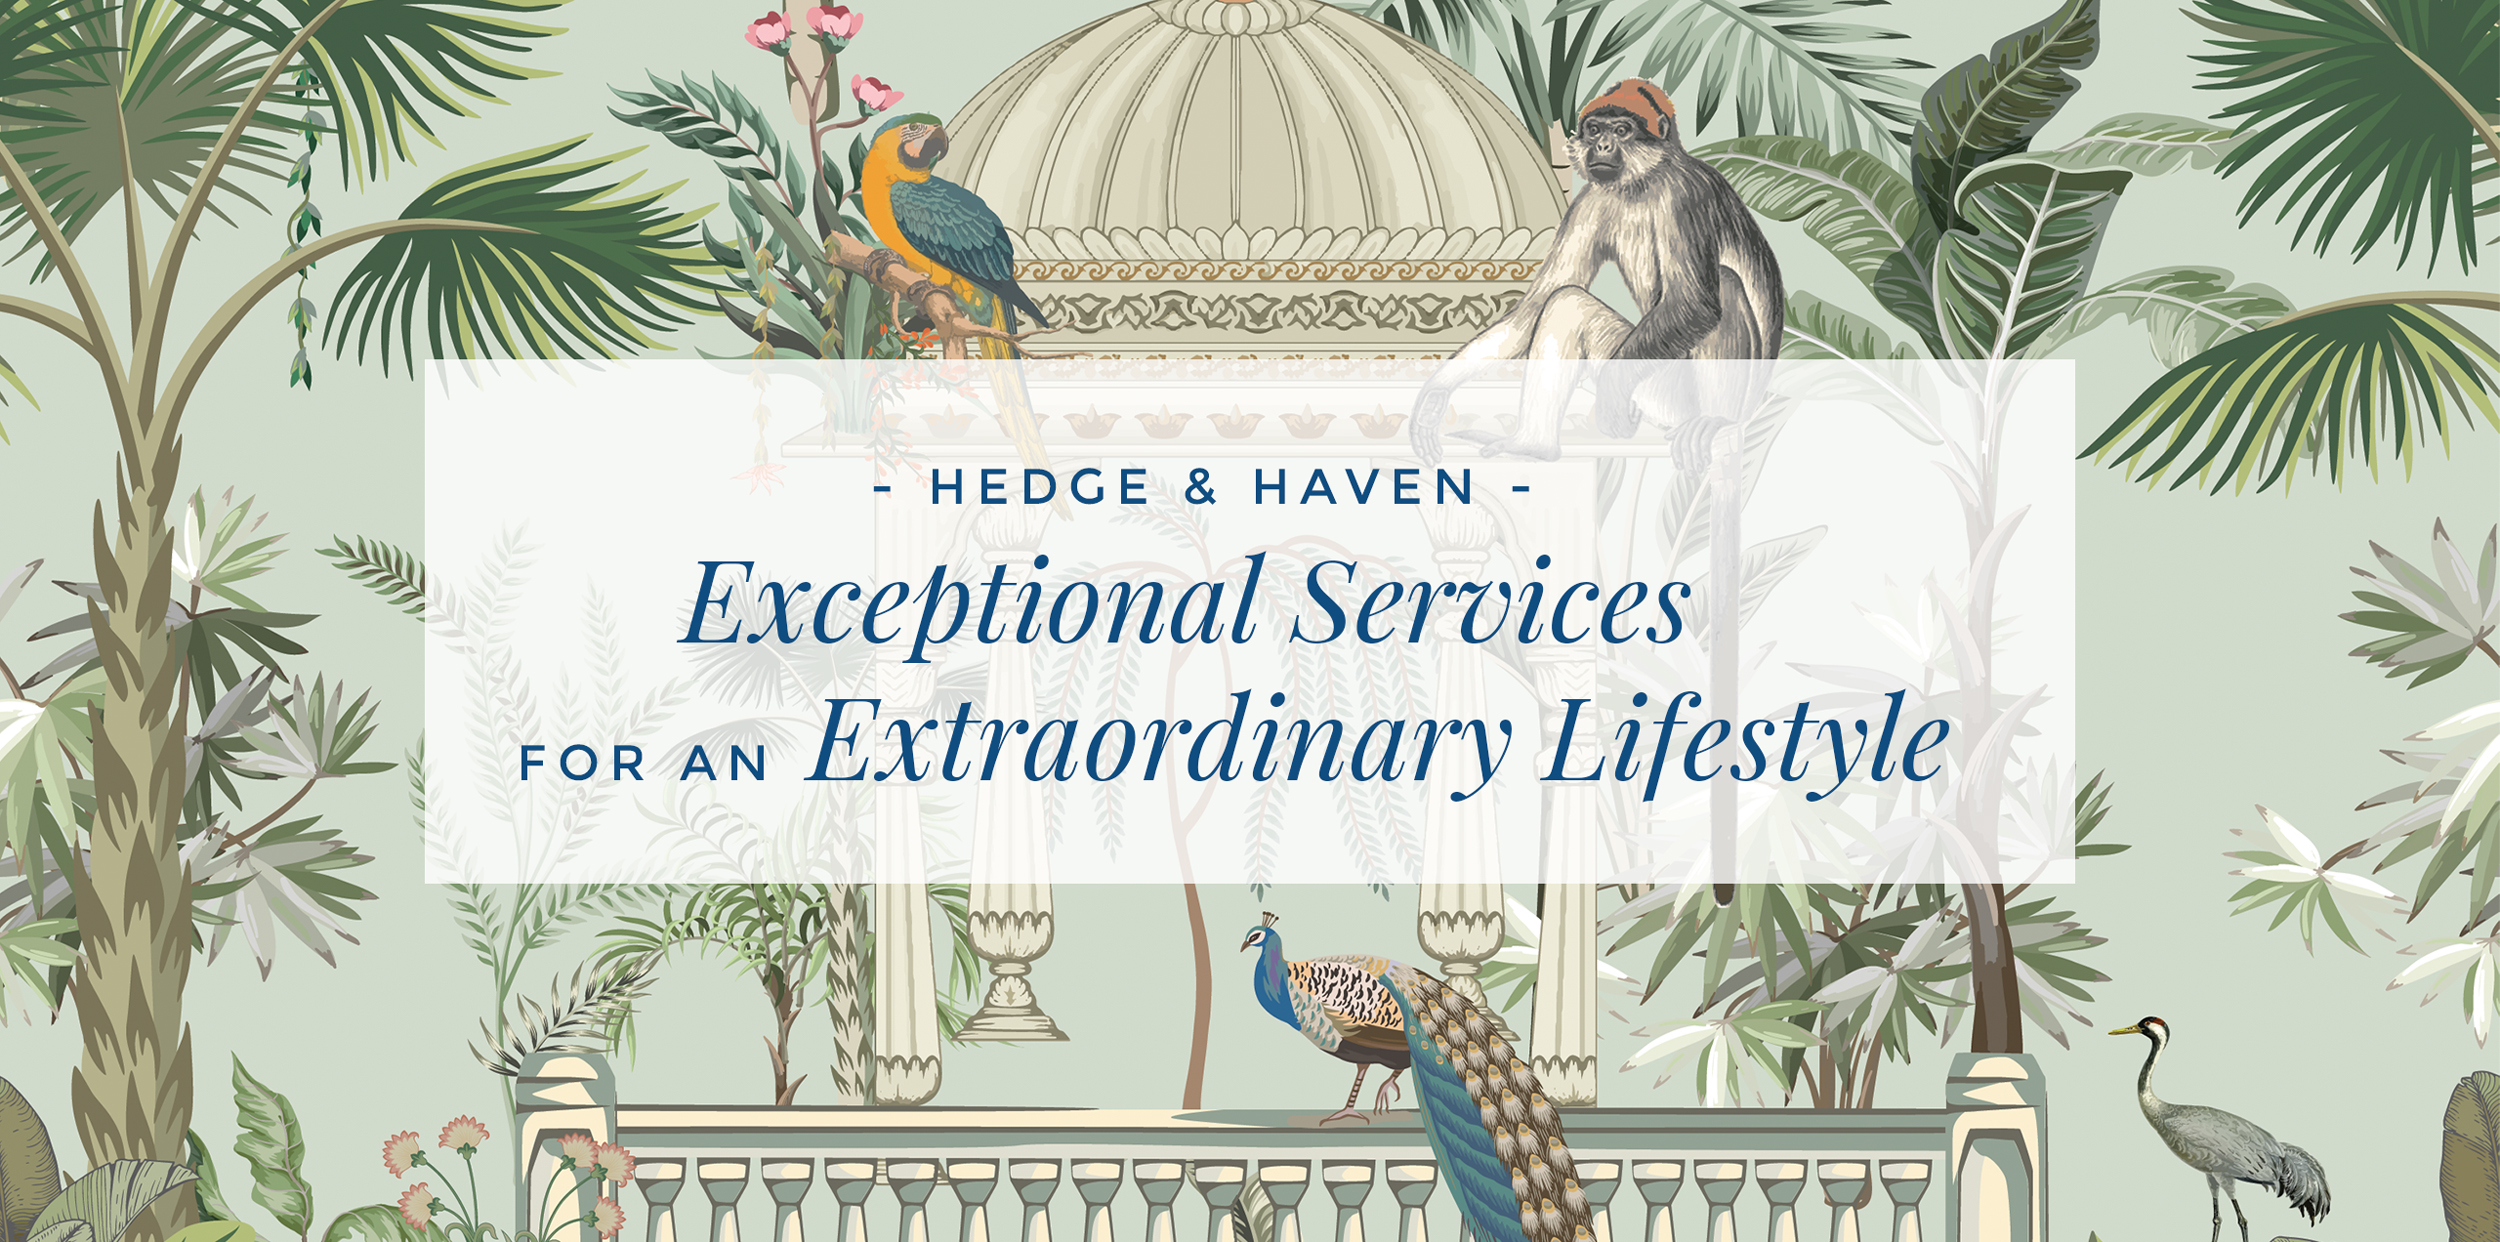 HEDGE & HAVEN: EXCEPTIONAL ASSISTANCE FOR AN EXTRAORDINARY LIFESTYLE